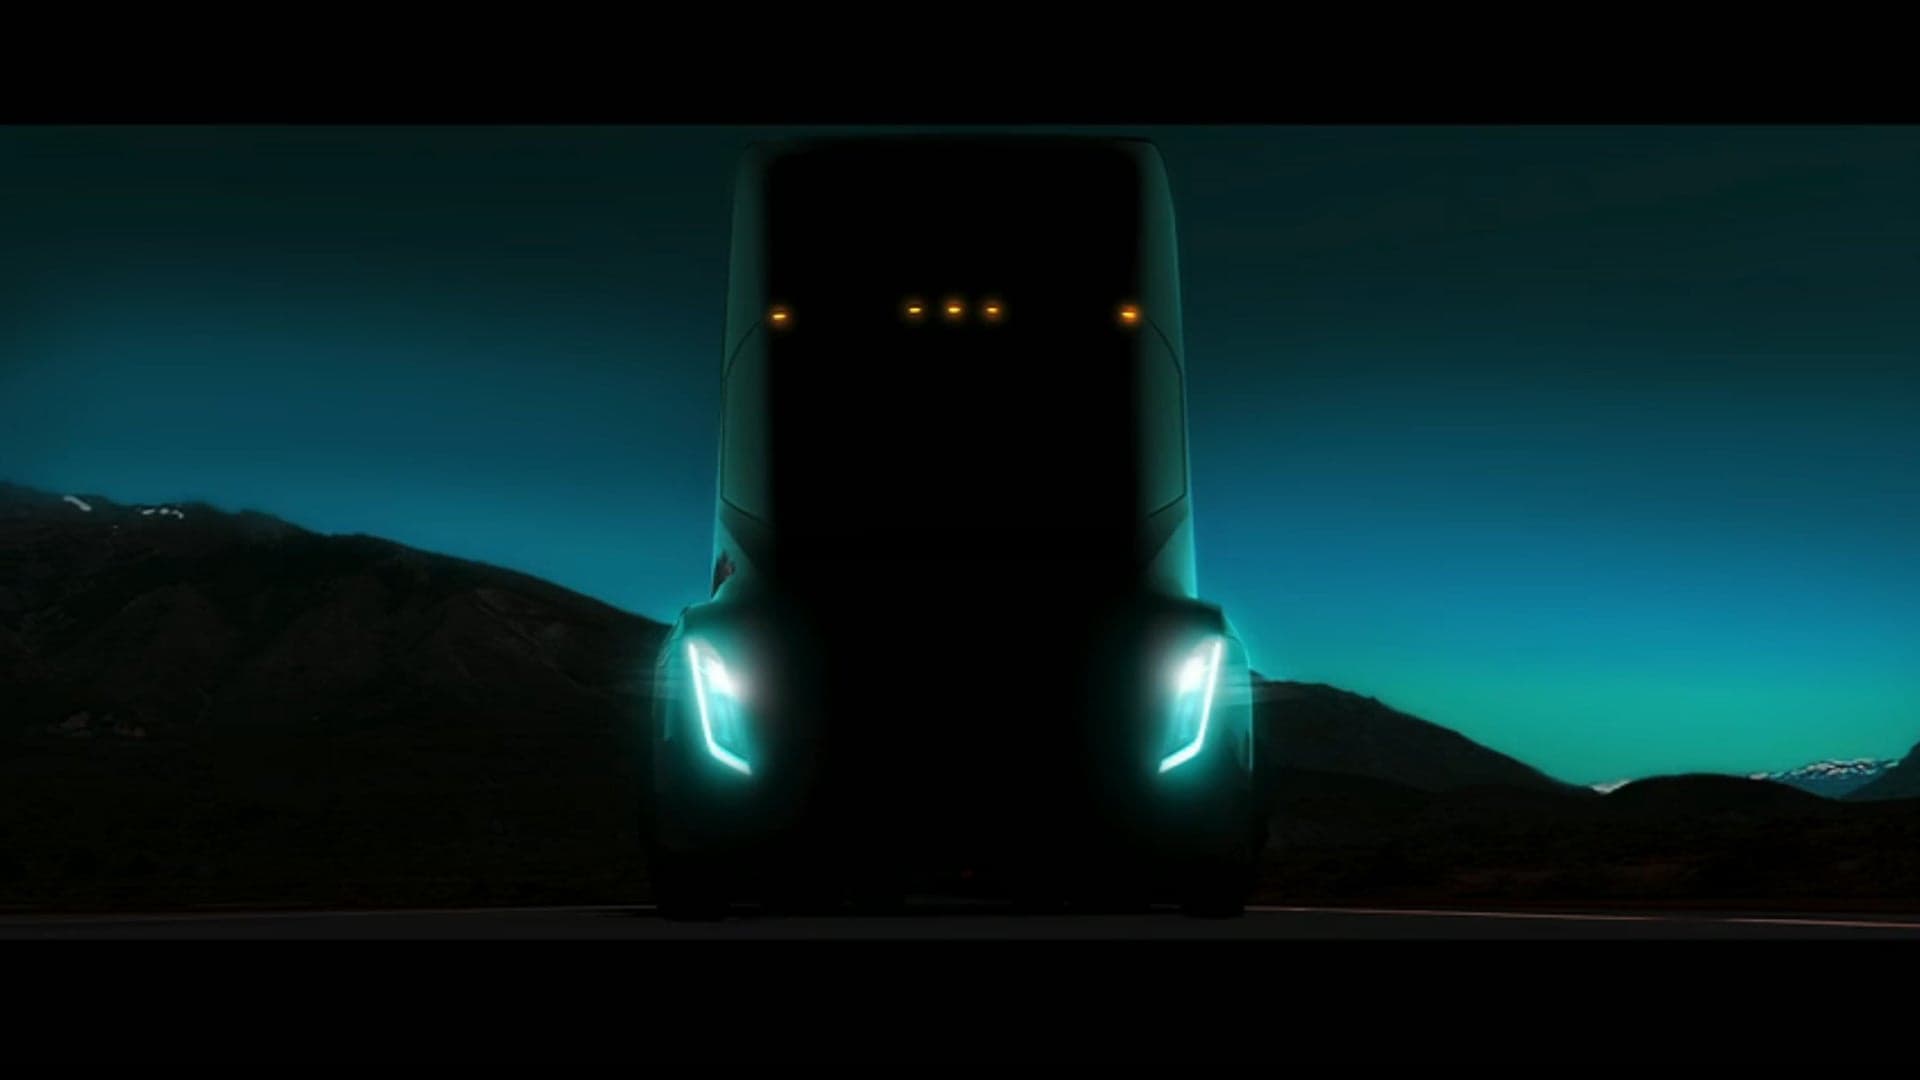 The Tesla Semi Truck May Have Up To 300 Miles of Range, Report Says